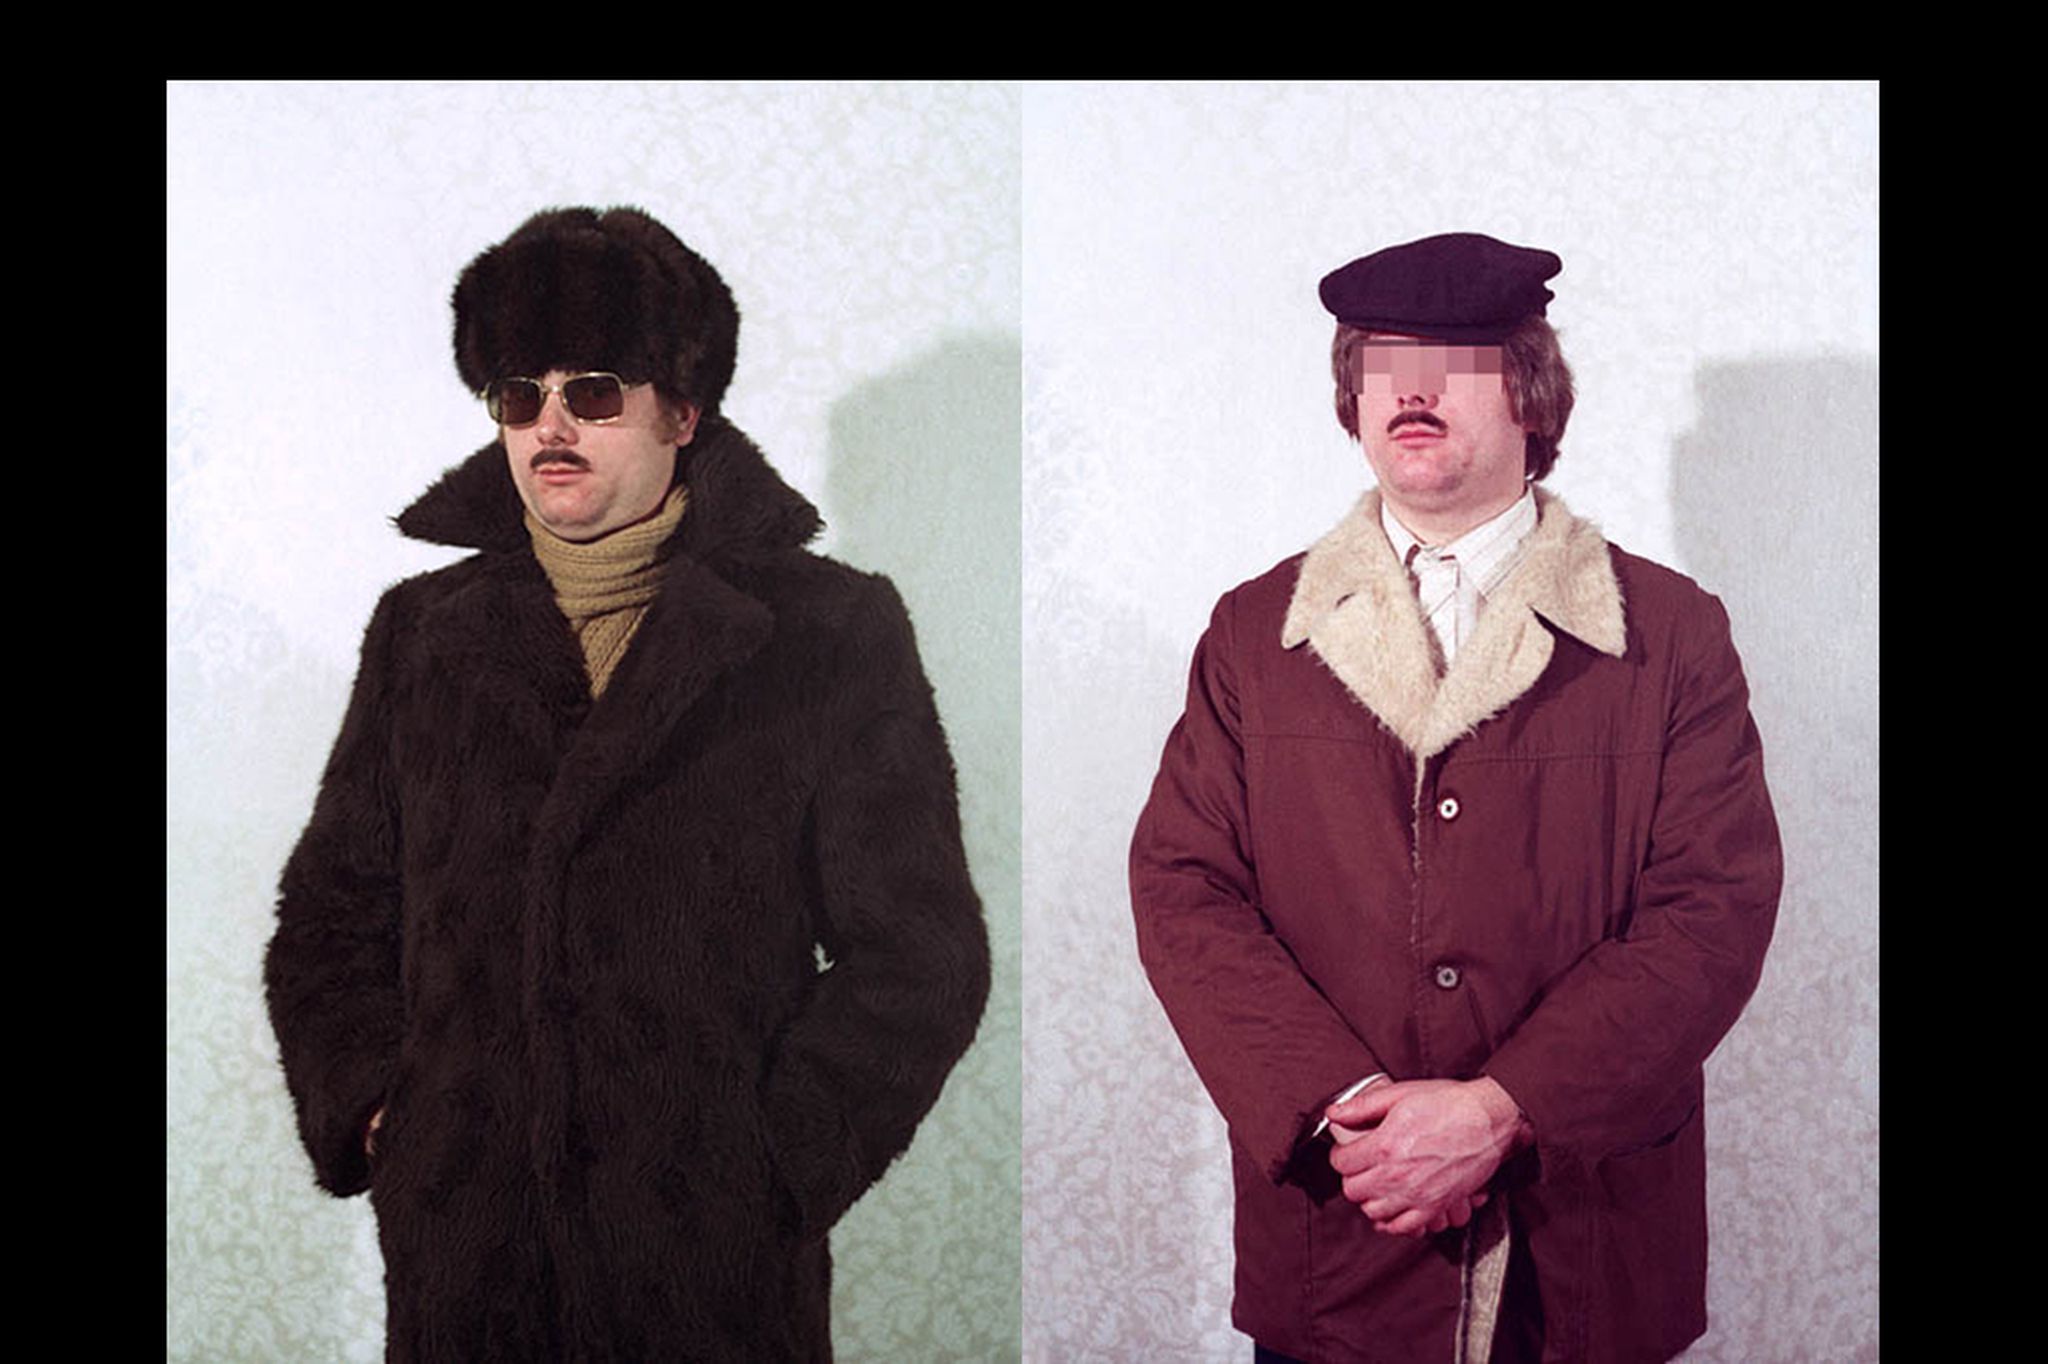 The declassified fashions of East German spies - The Verge